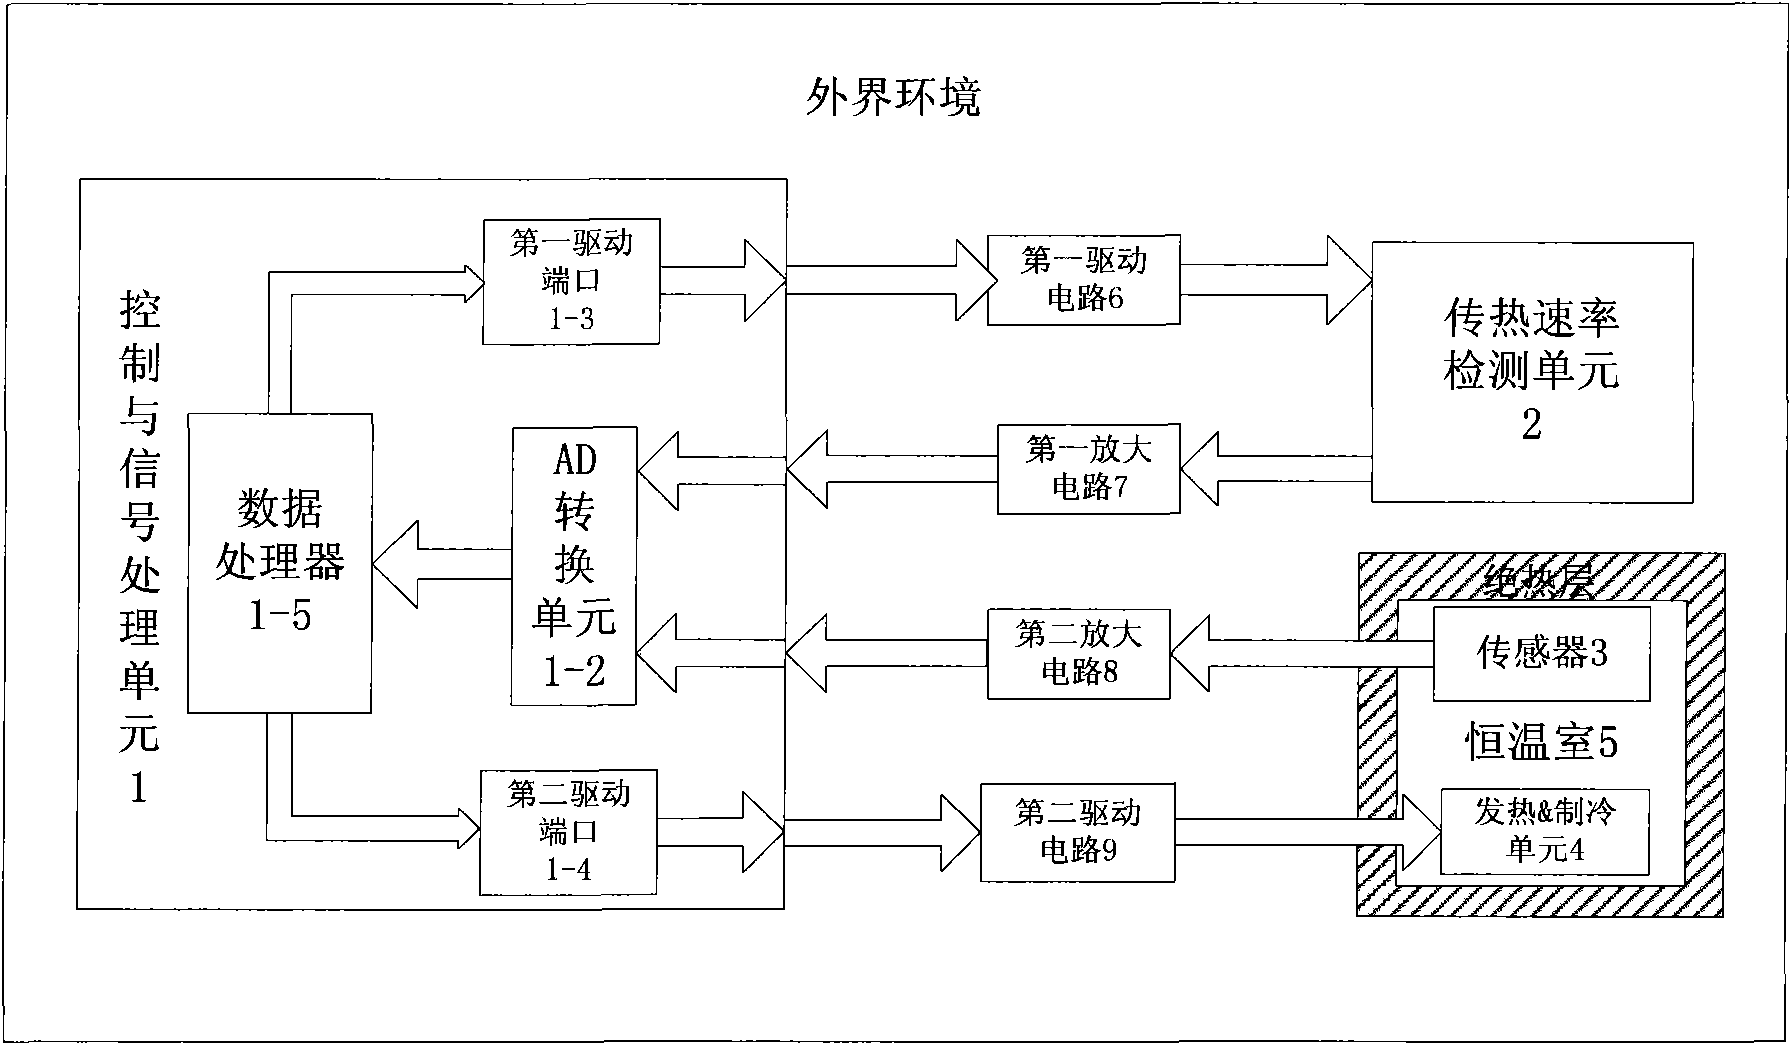 Thermostatic control device and method with detection of heat transfer rate